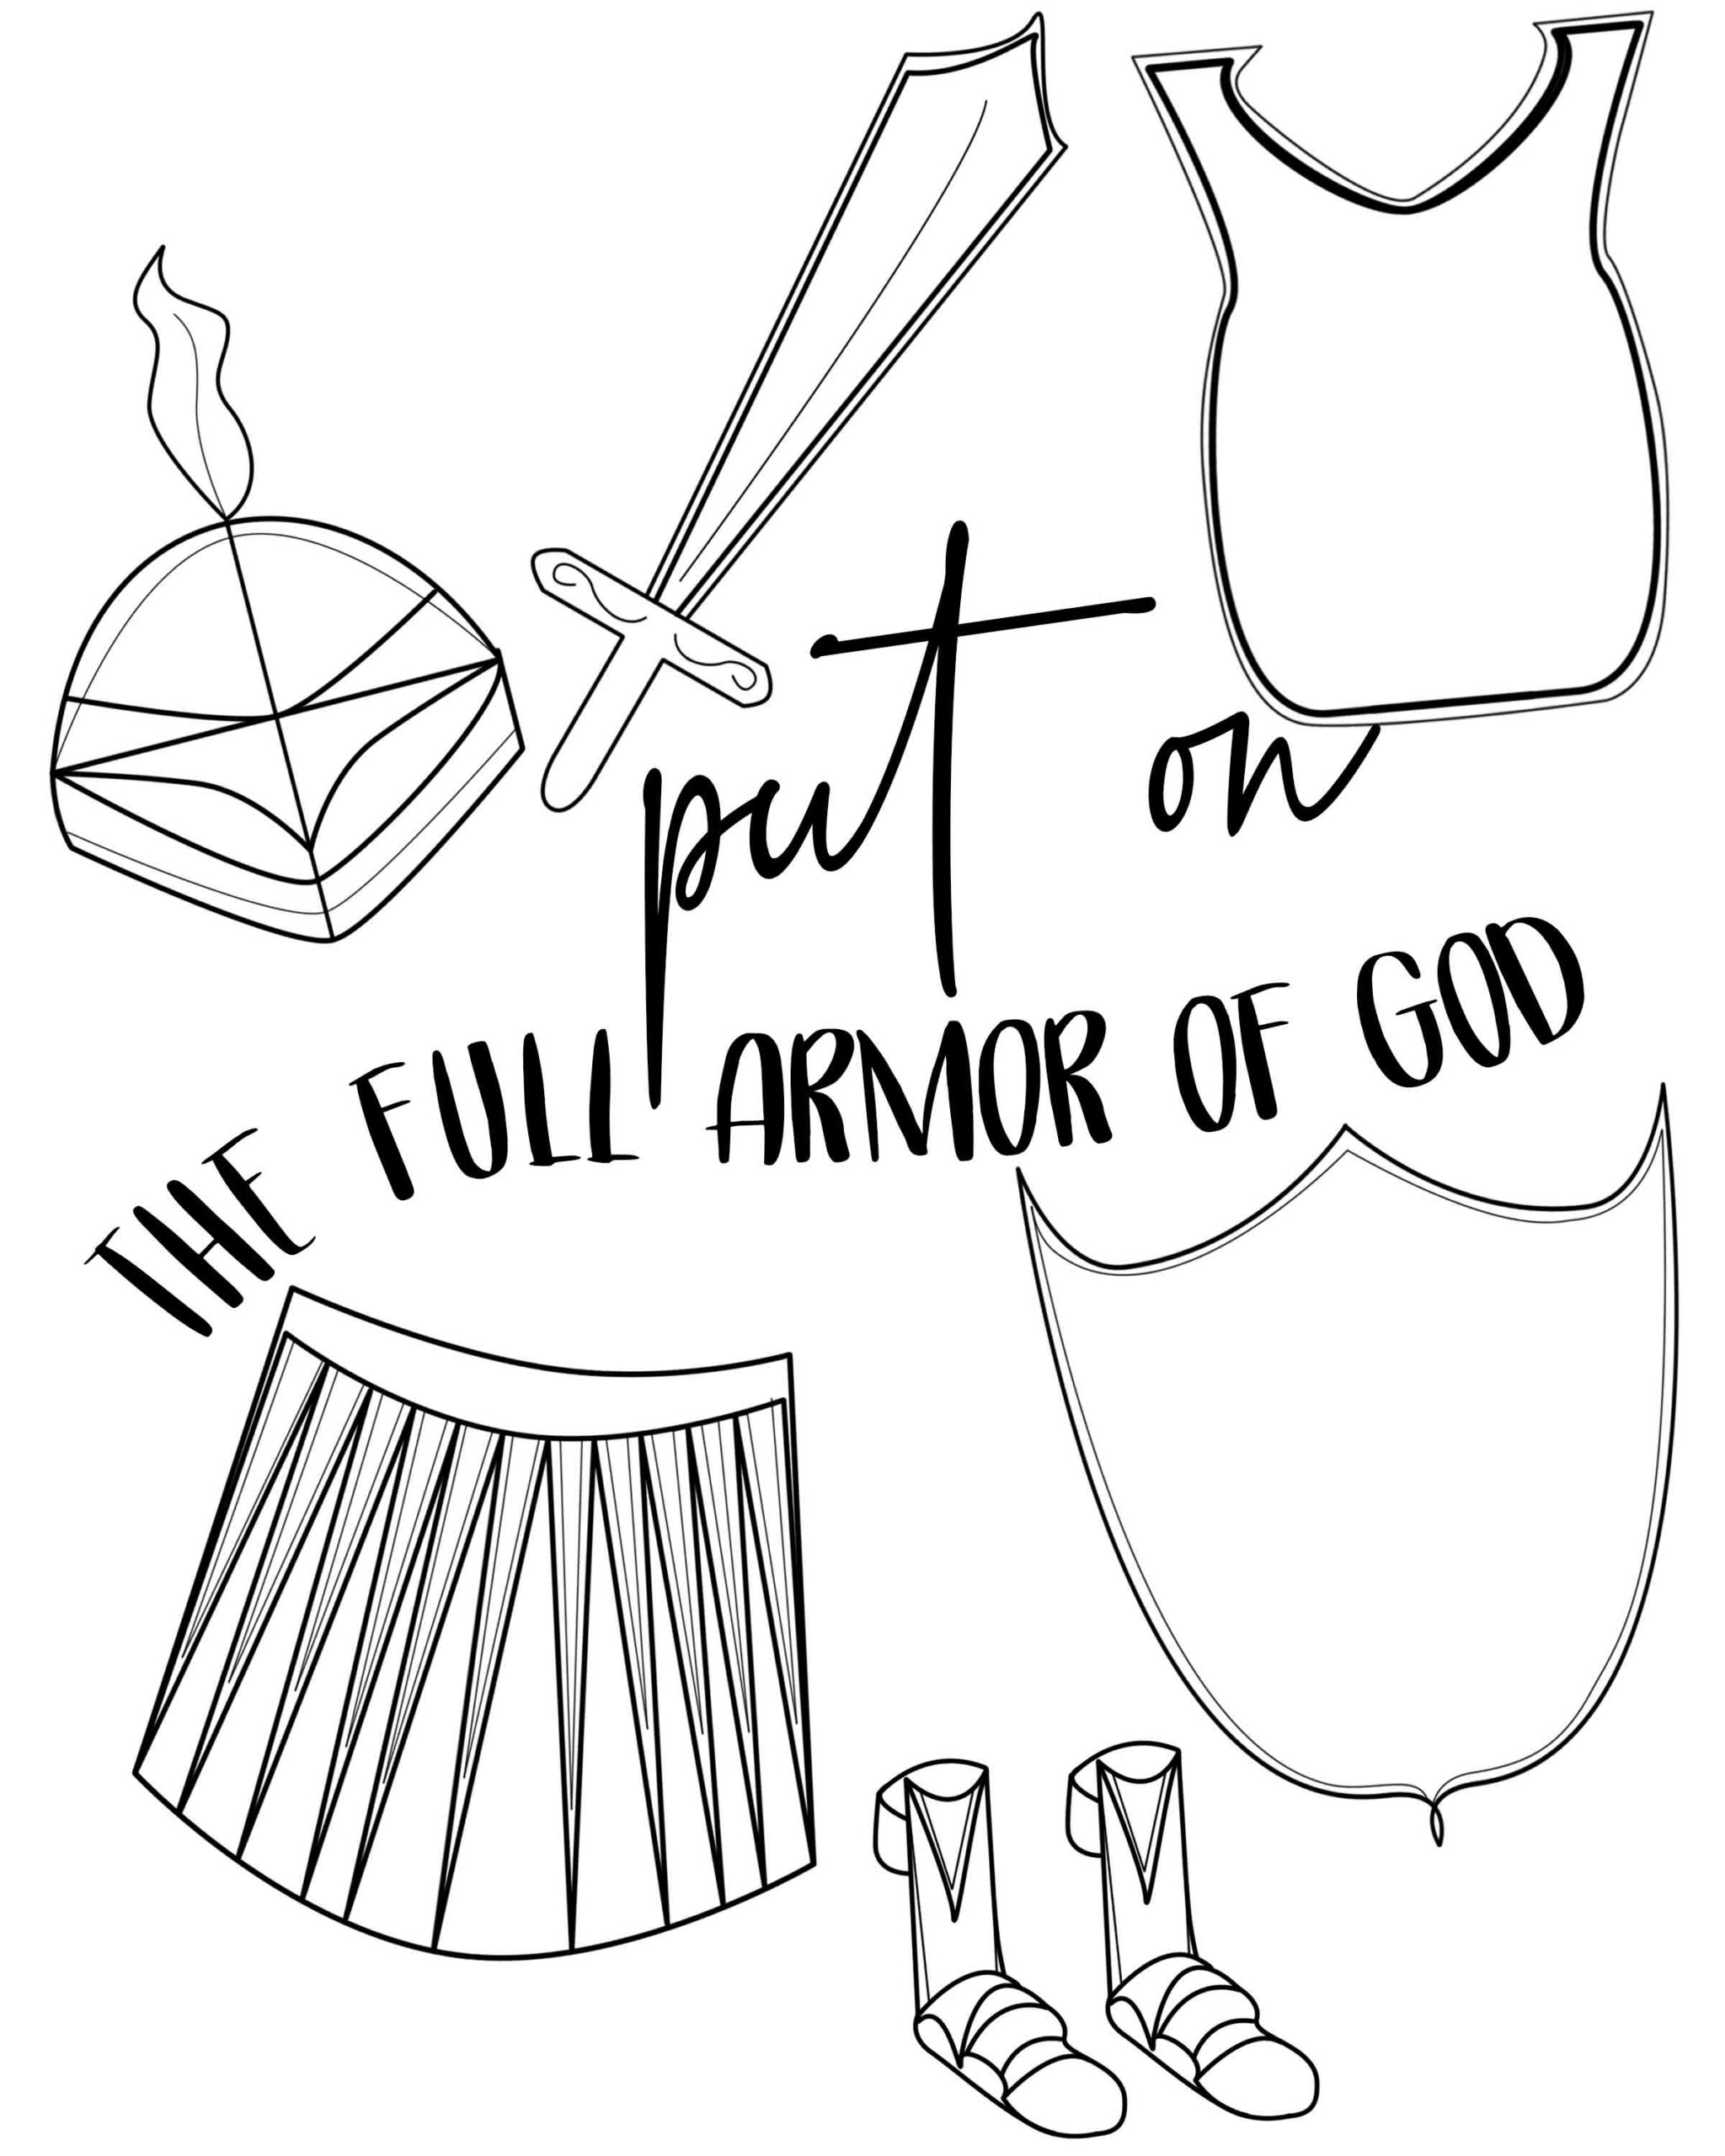 armor of god coloring pages free